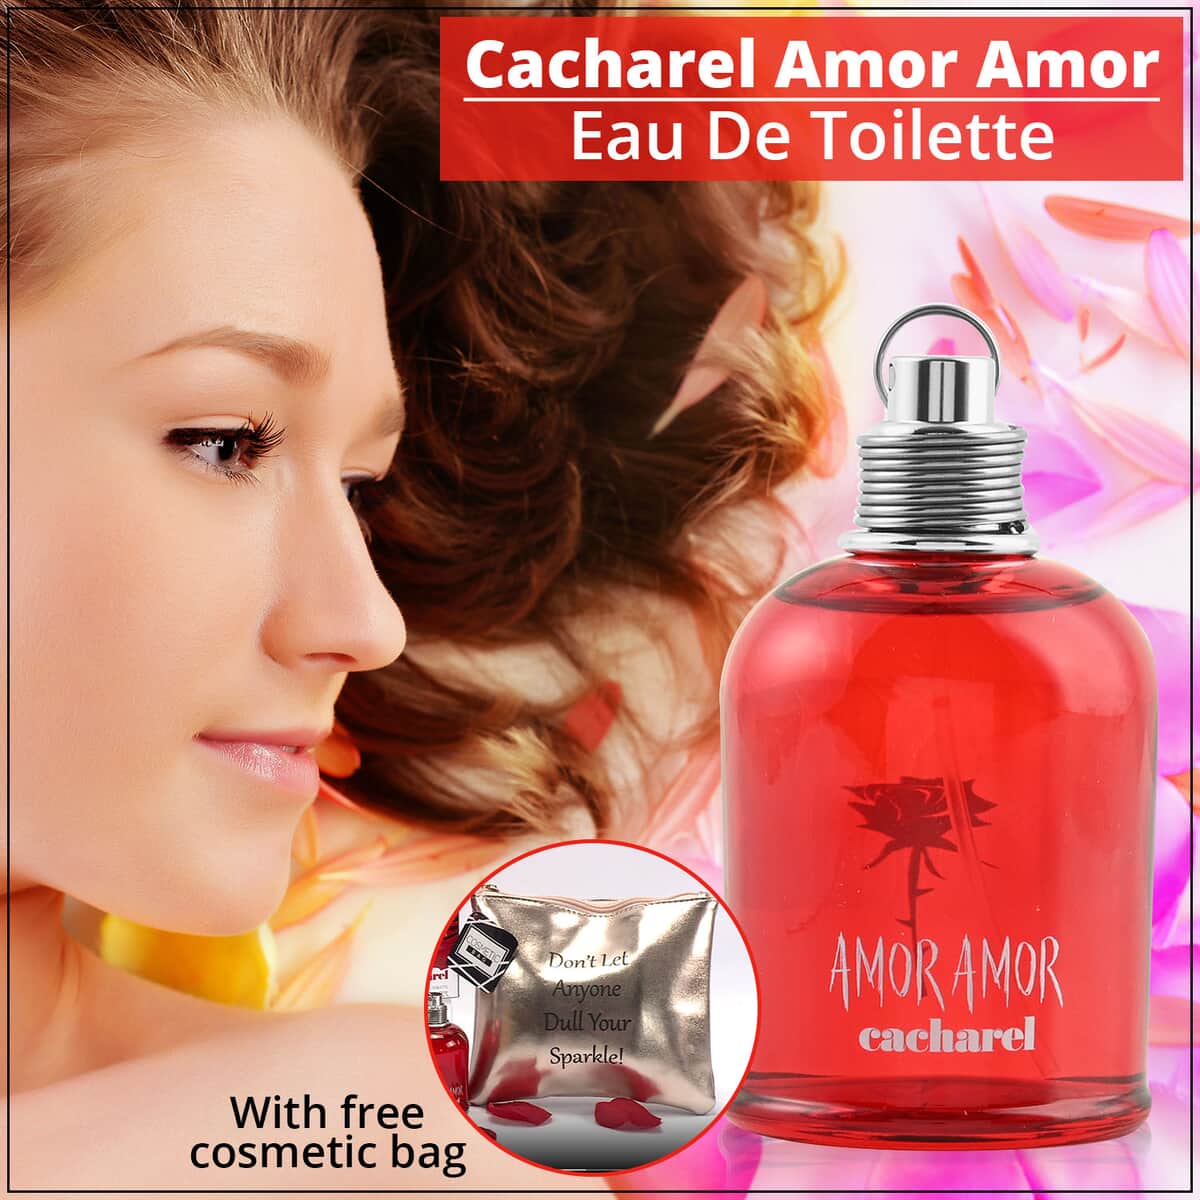 Buy Cacharel Amor Amor Eau De Toilette 3.4 oz with FREE Cosmetic Bag at